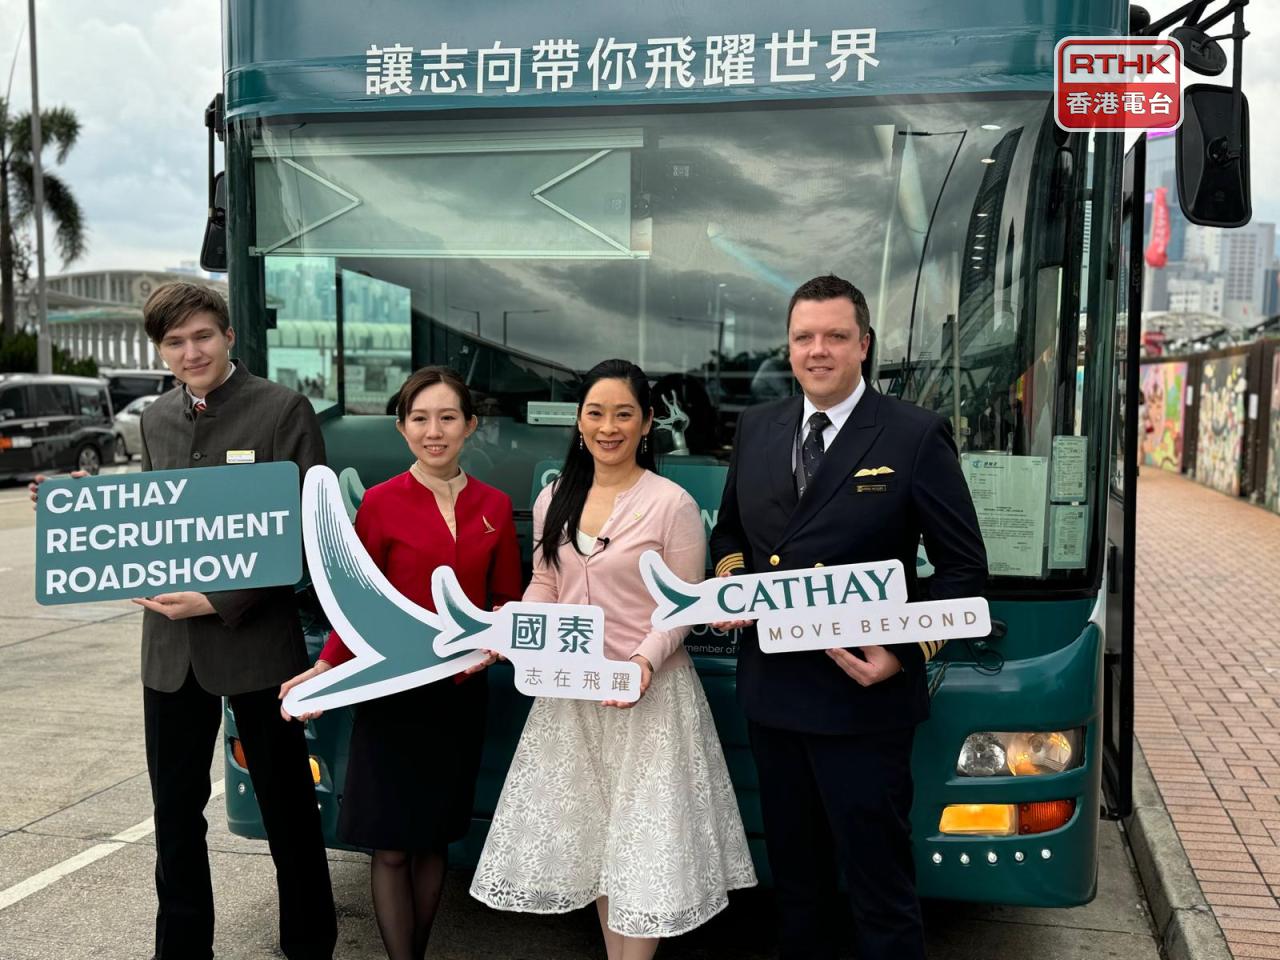 Cathay to hire more staff, return to pre-Covid level